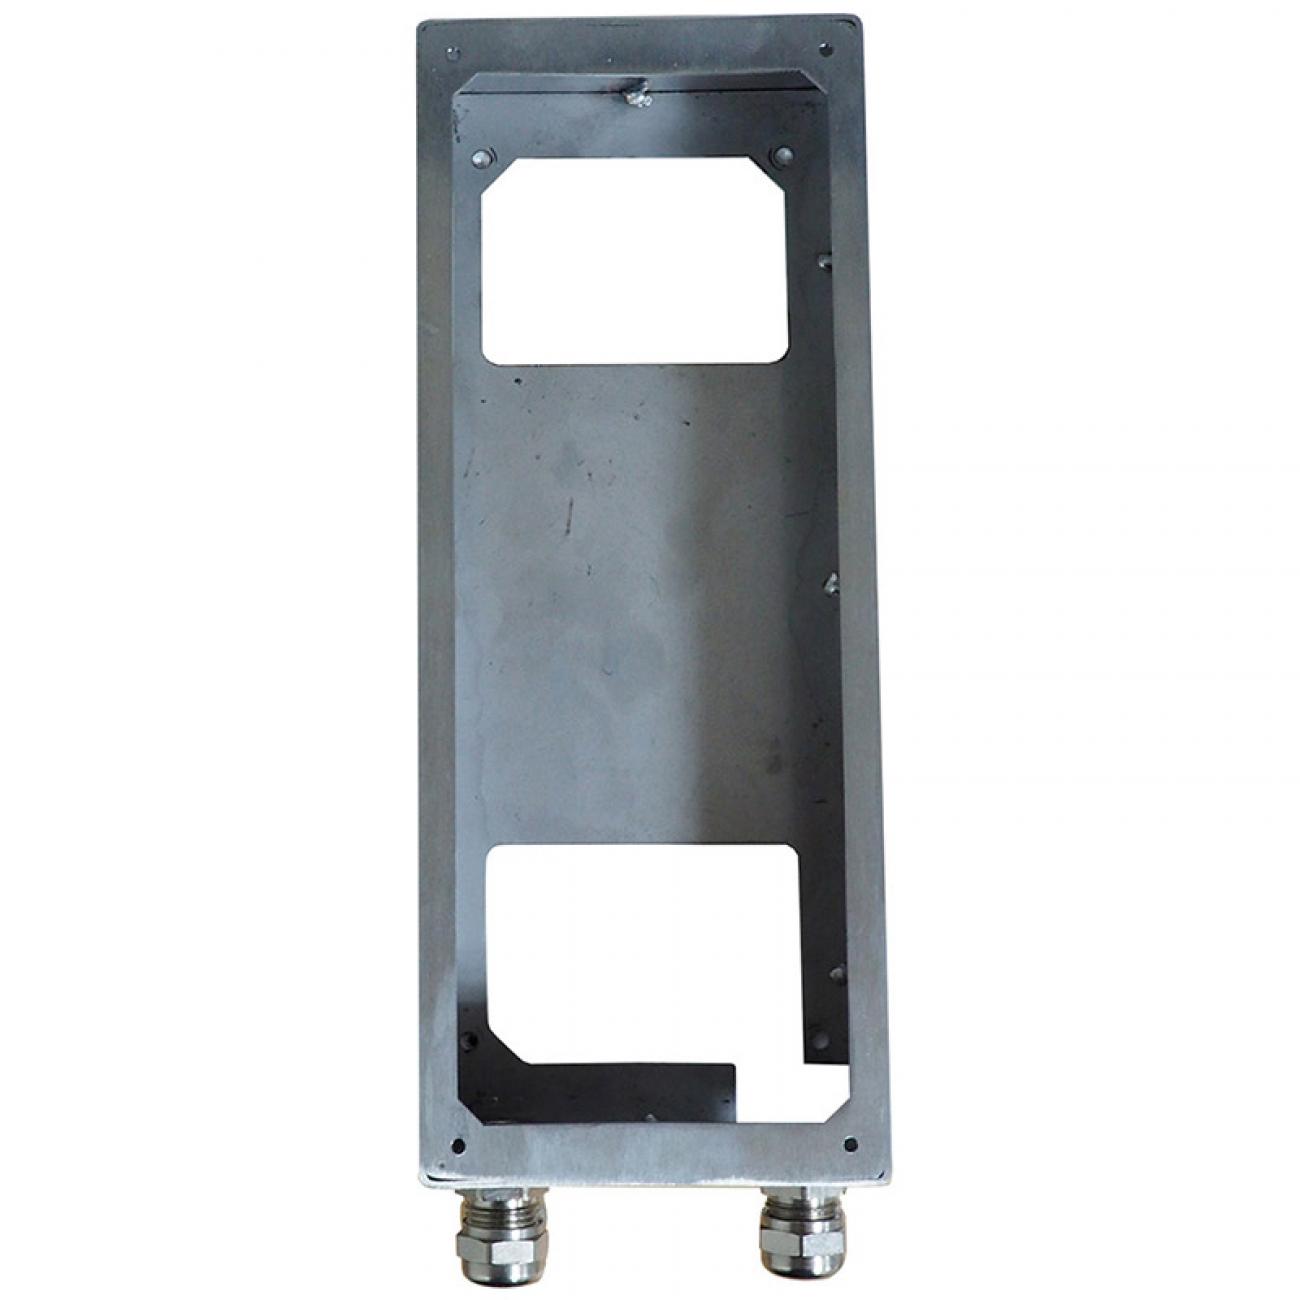 BI 310 Stainless steel housing Stainless steel housing for surface mounting of the CPE310-S and ATE-310 devices